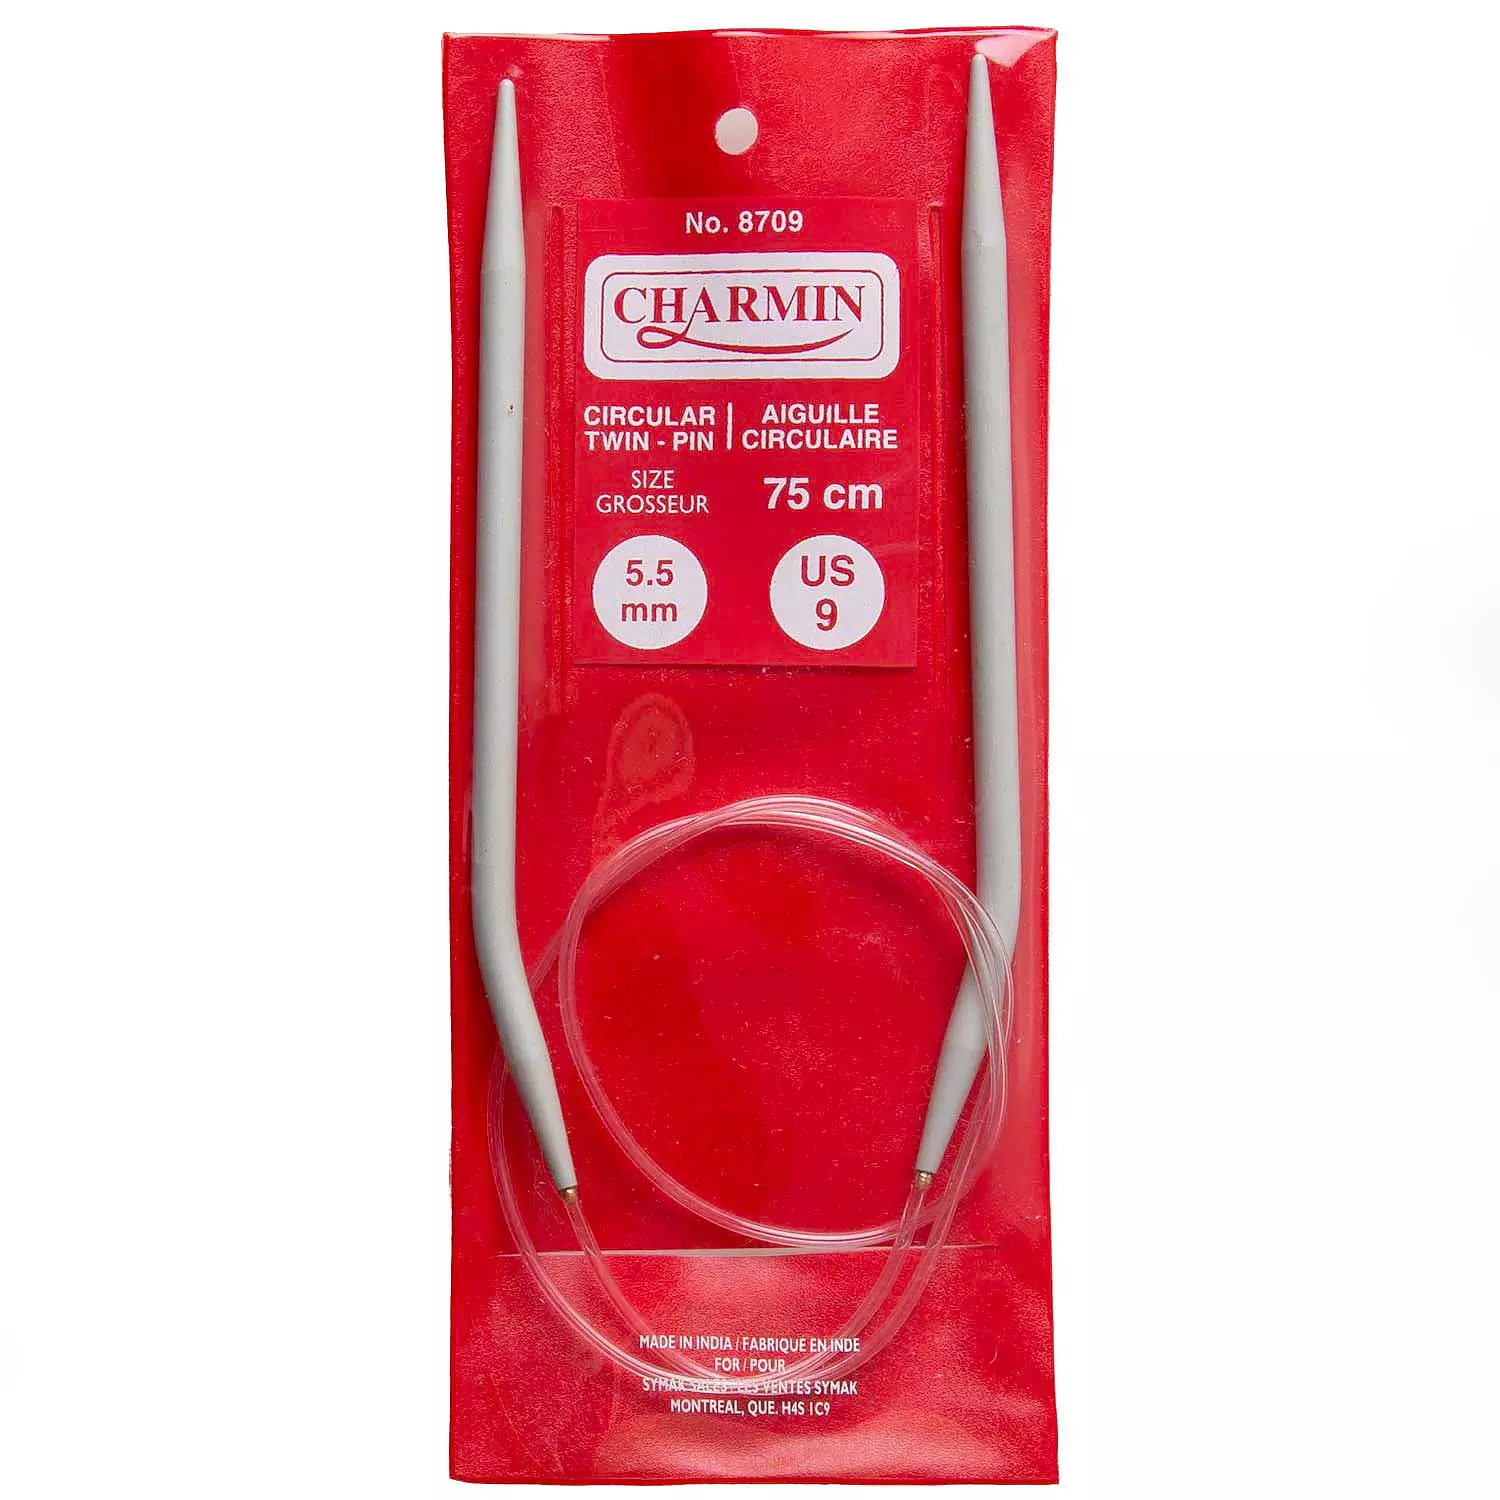 Charmin - Sewing needles, 5.5 mm Size: 75 cm